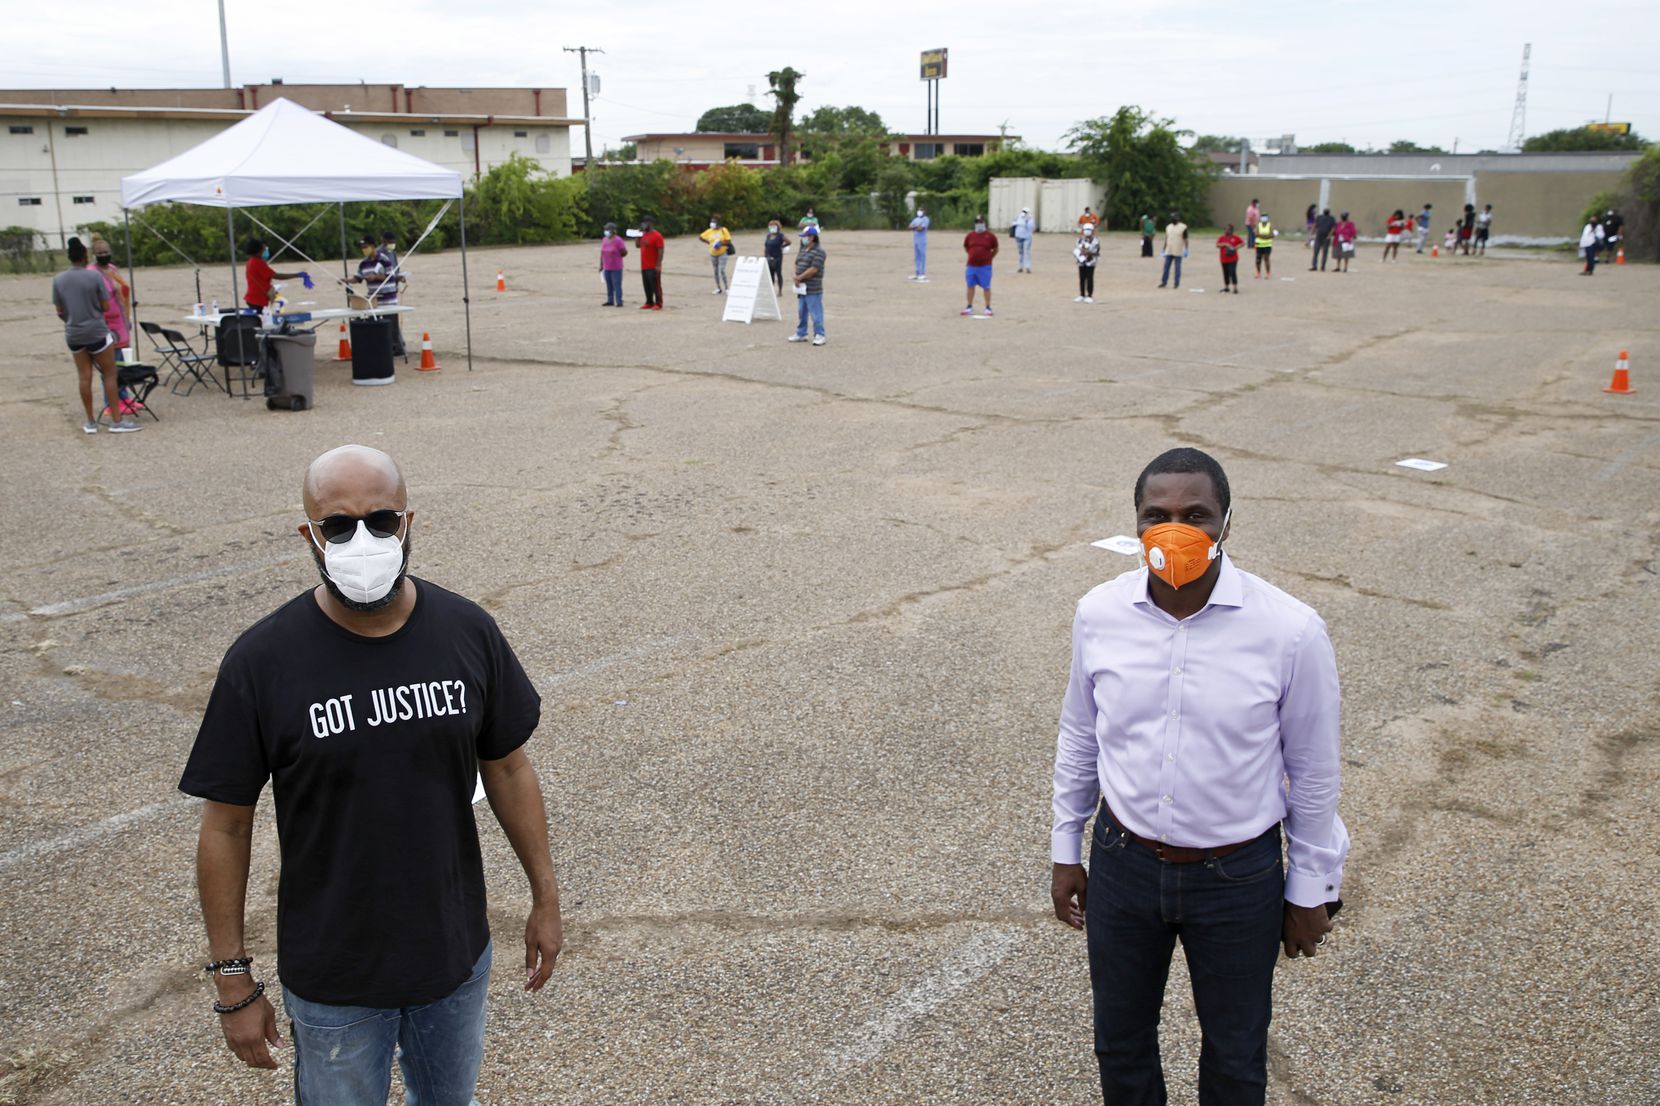 Pastor Frederick D. Haynes (left) of Friendship-West Baptist Church of Dallas and Pastor Richie L. Butler (right) of St. Paul United Methodist Church of Dallas pose for a portrait while people wait in line at a free testing site for coronavirus in Dallas, on Thursday, May 28, 2020.